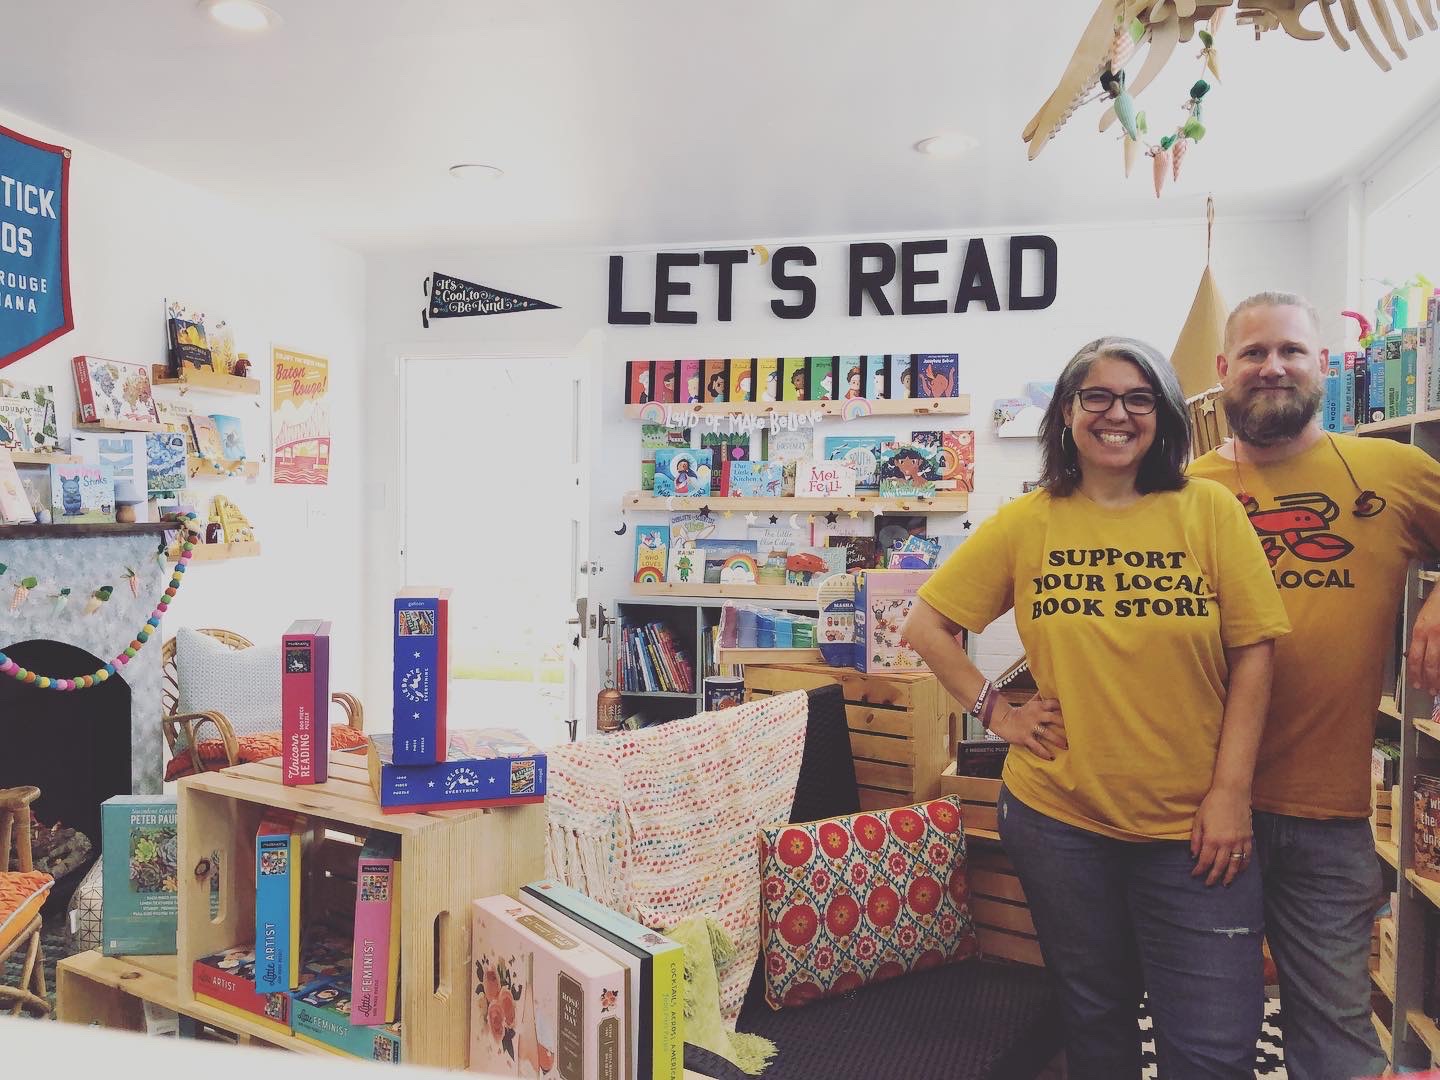 Red Stick Reads aims to be your cozy local bookstore hangout - 225 Baton Rouge